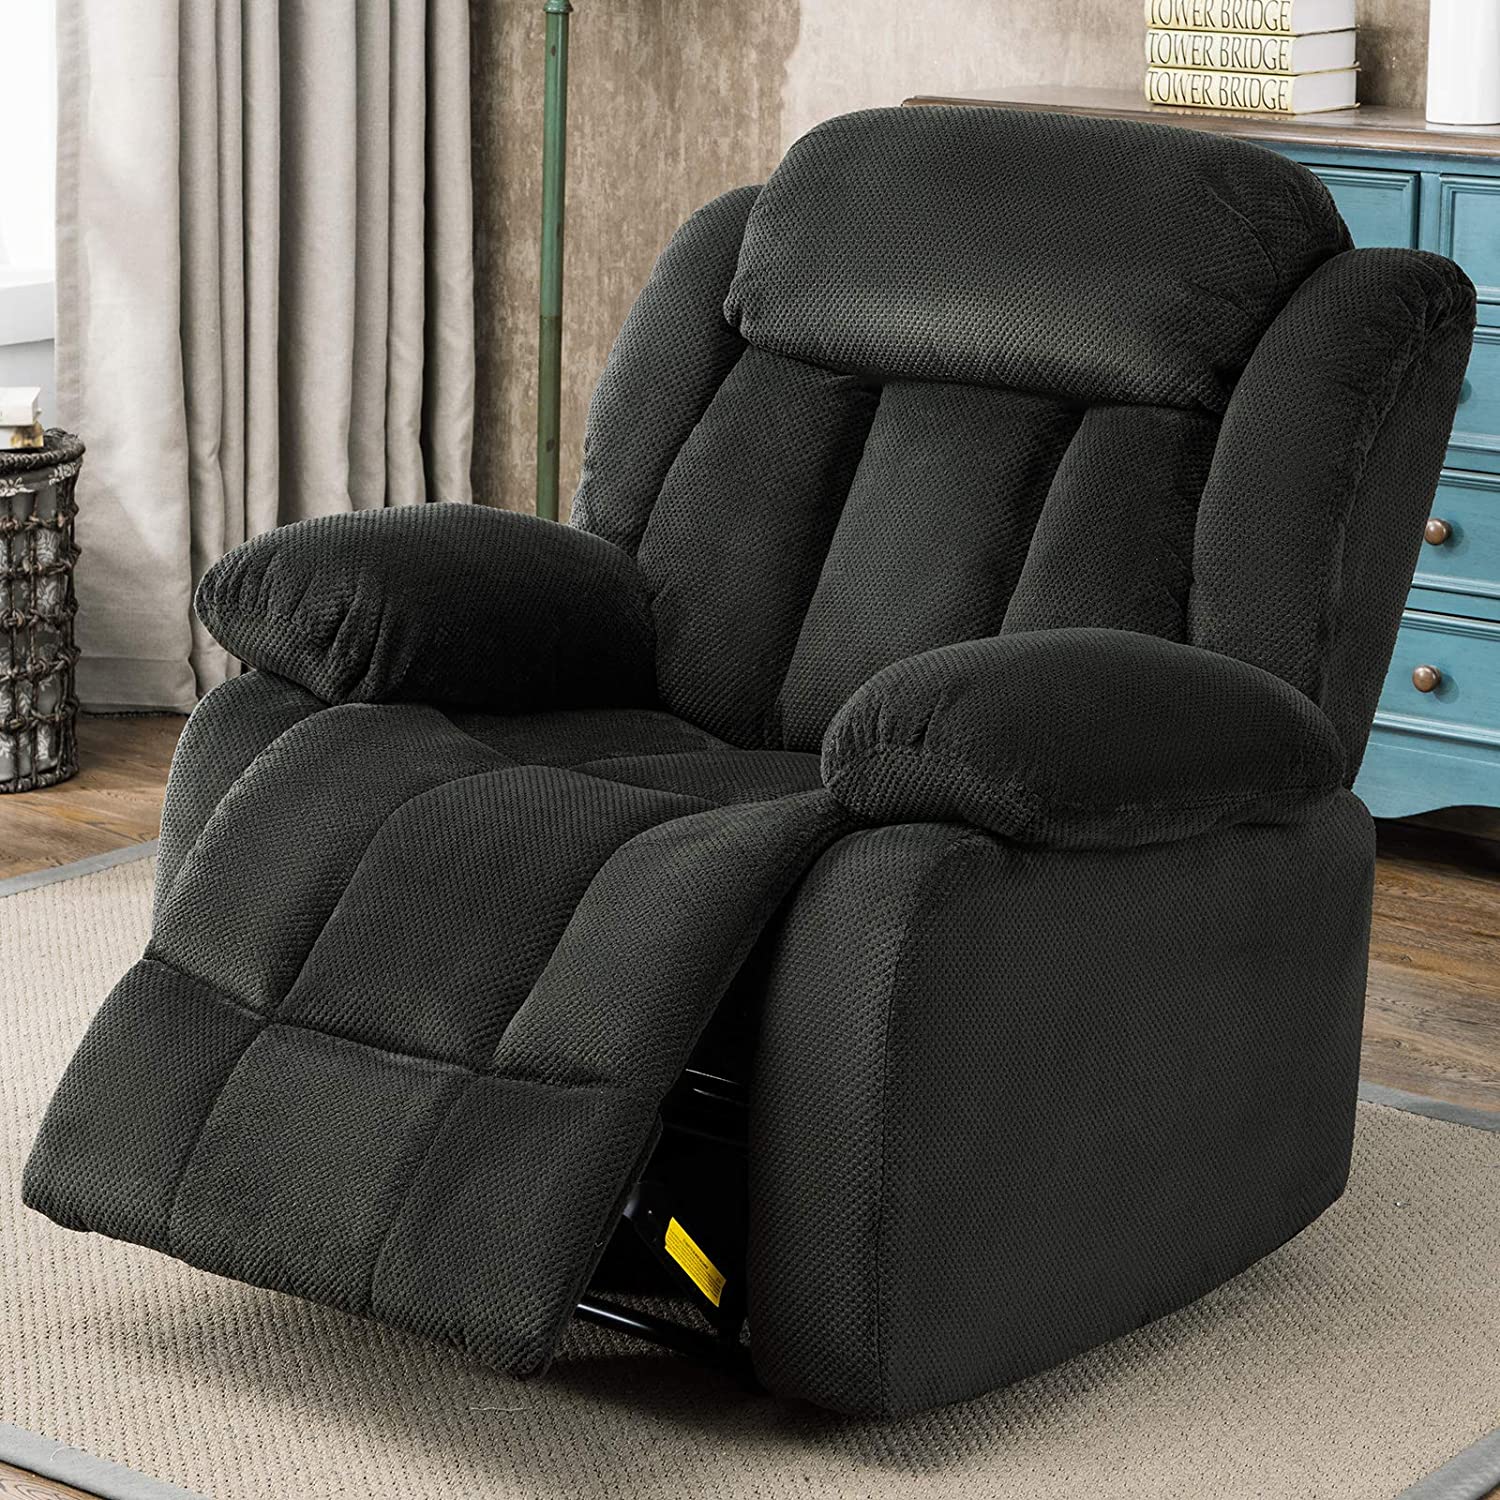 ANJ-Breathable-Fabric-Recliner-Chairs